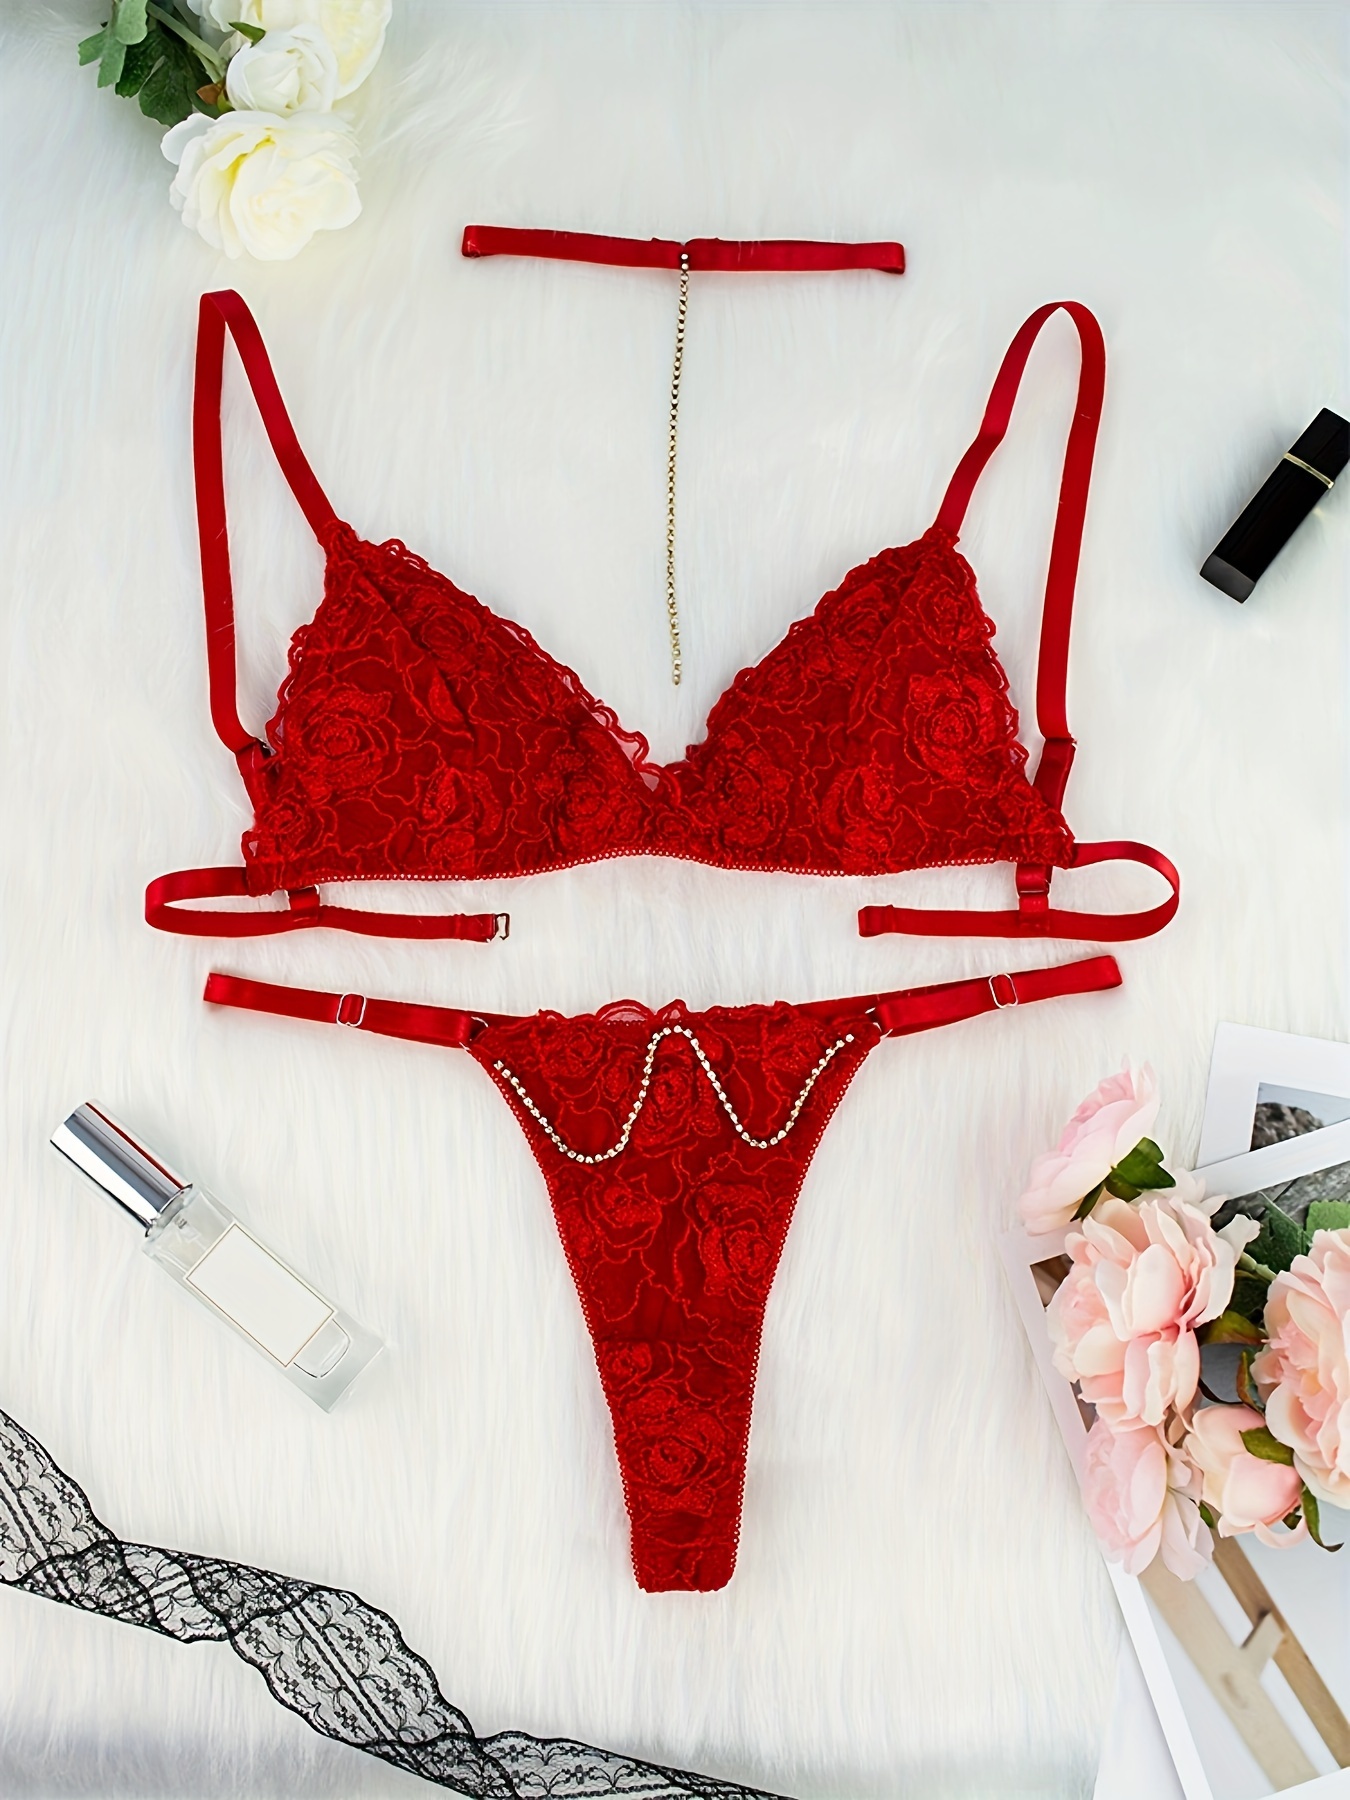 Dropship Sexy Women Lingerie Set Thin Lace Flower Printed Underwear Suit  Female Adjustable Shoulder Strap Triangle Cup Bralettle to Sell Online at a  Lower Price